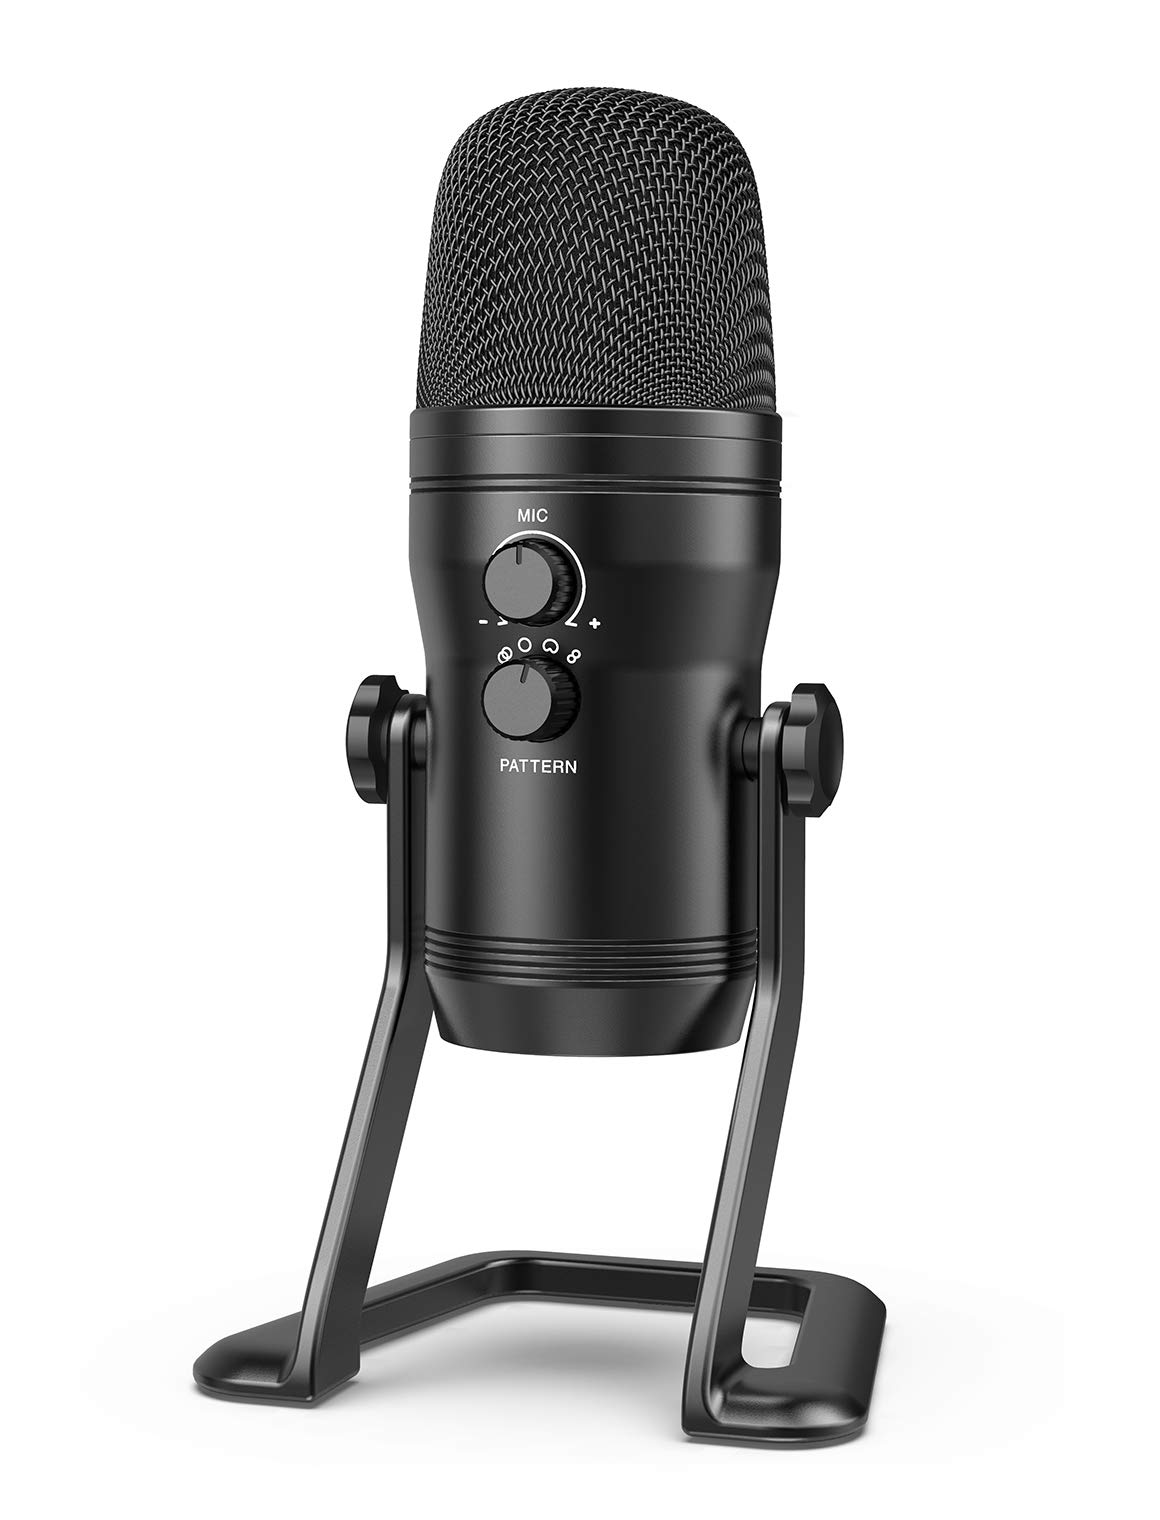 Mua FIFINE USB Studio Recording Microphone Computer Podcast Mic for PC,  PS4, Mac with Mute Button & Monitor Headphone Jack, Four Pickup Patterns  for Vocals YouTube Streaming Gaming ASMR Zoom-Class (K690) trên